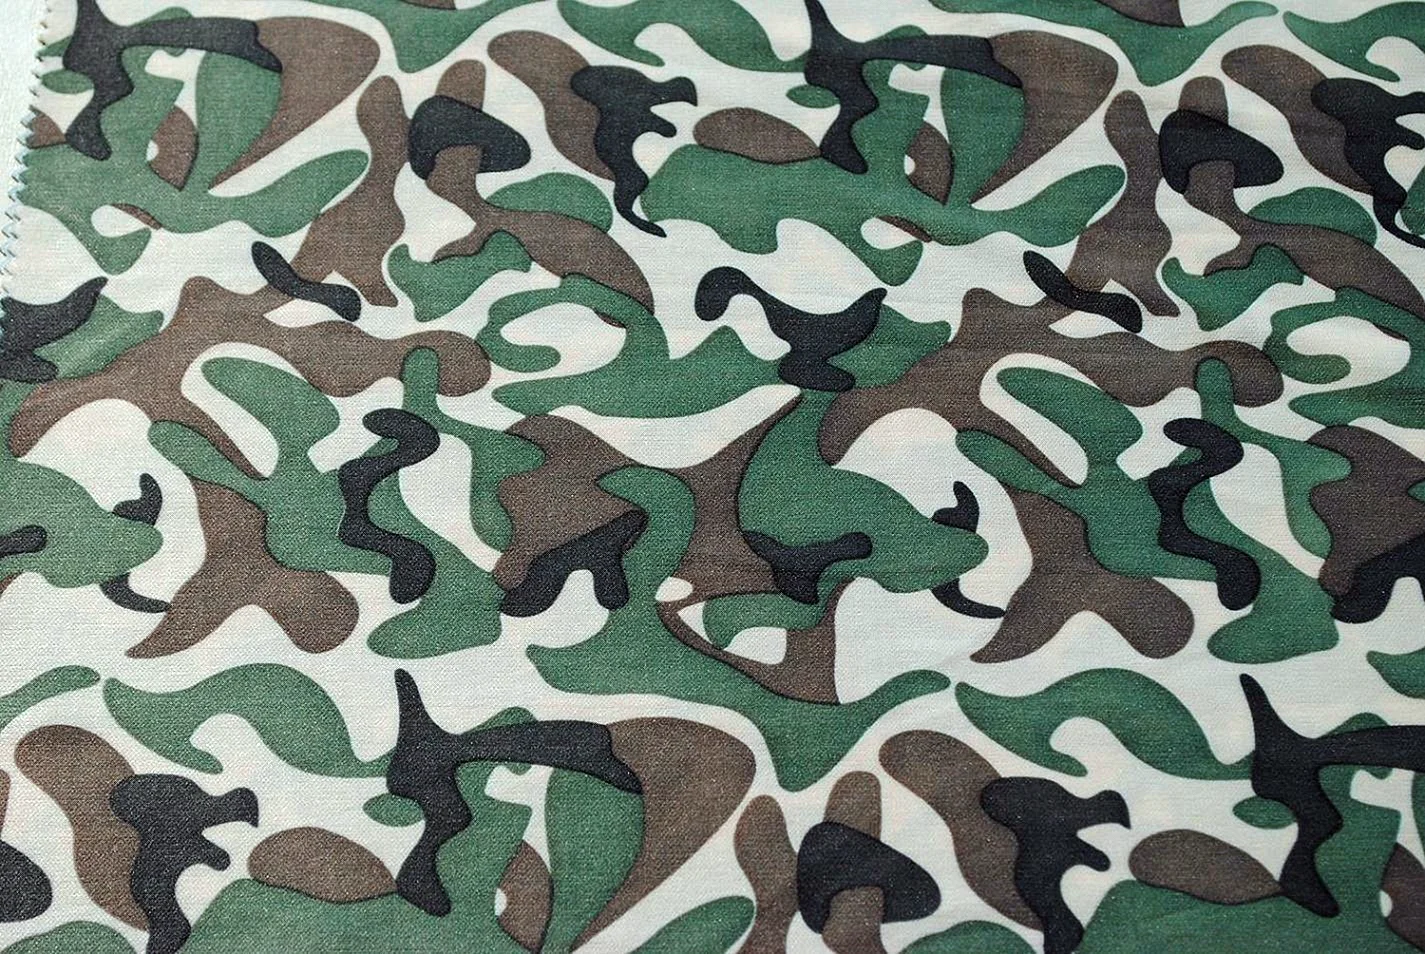 Military Camouflage Camo Wallpaper